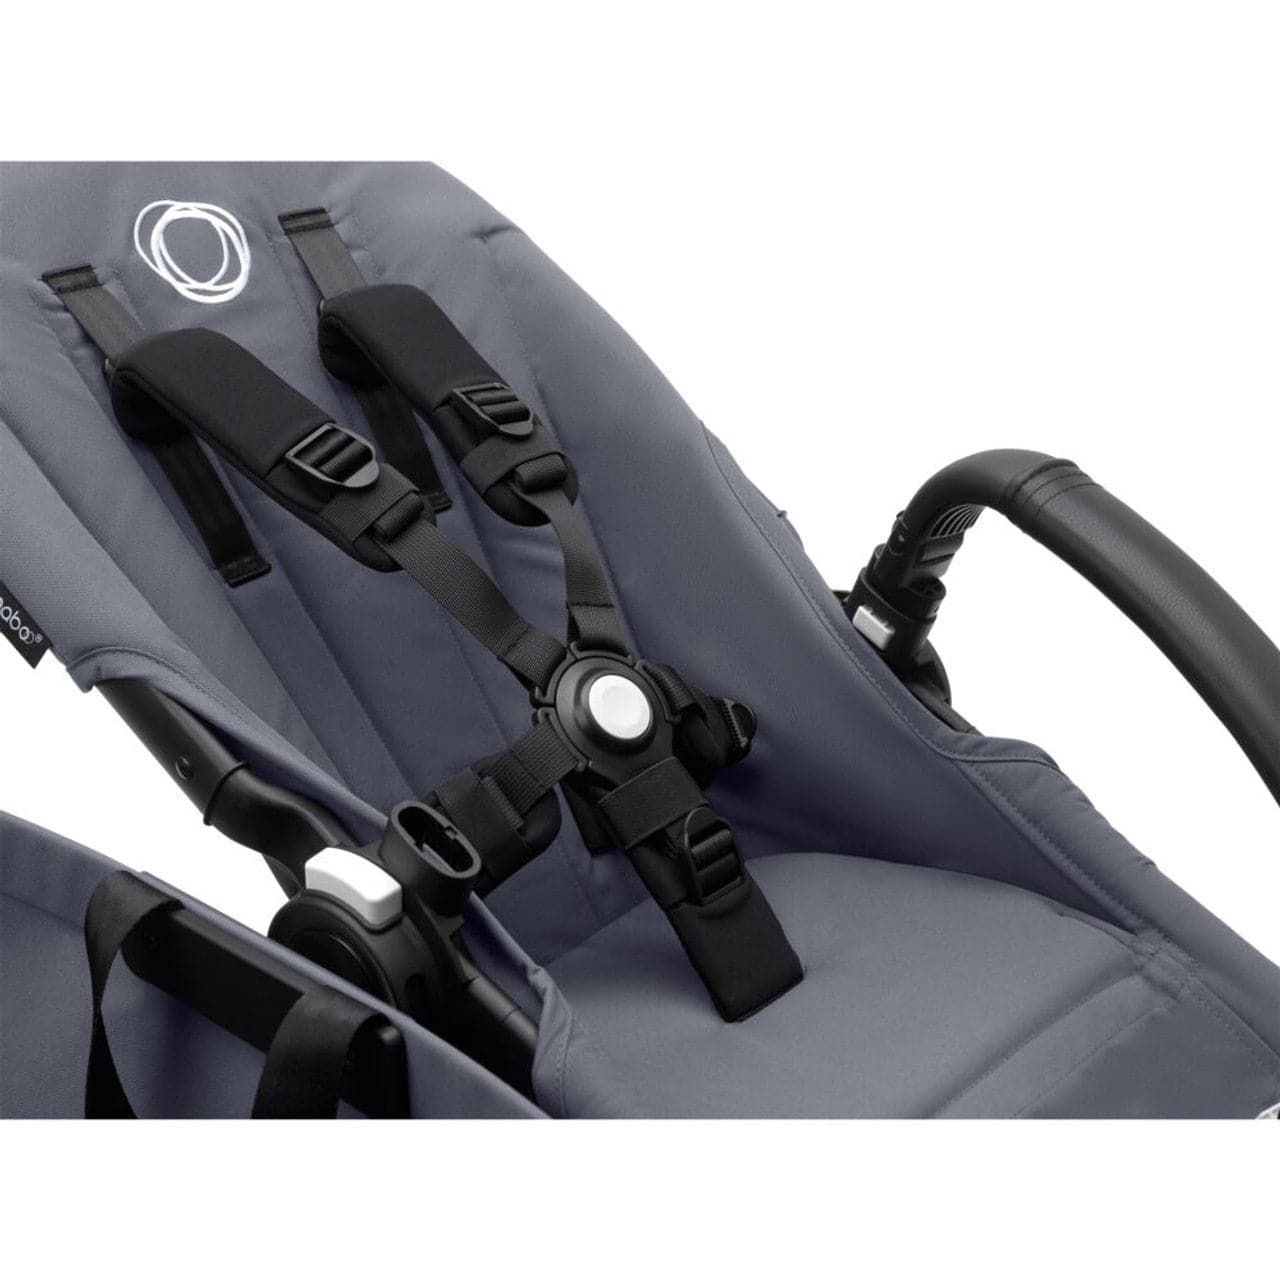 Bugaboo Donkey 5 Twin Complete Pushchair - Black/Midnight Black - For Your Little One